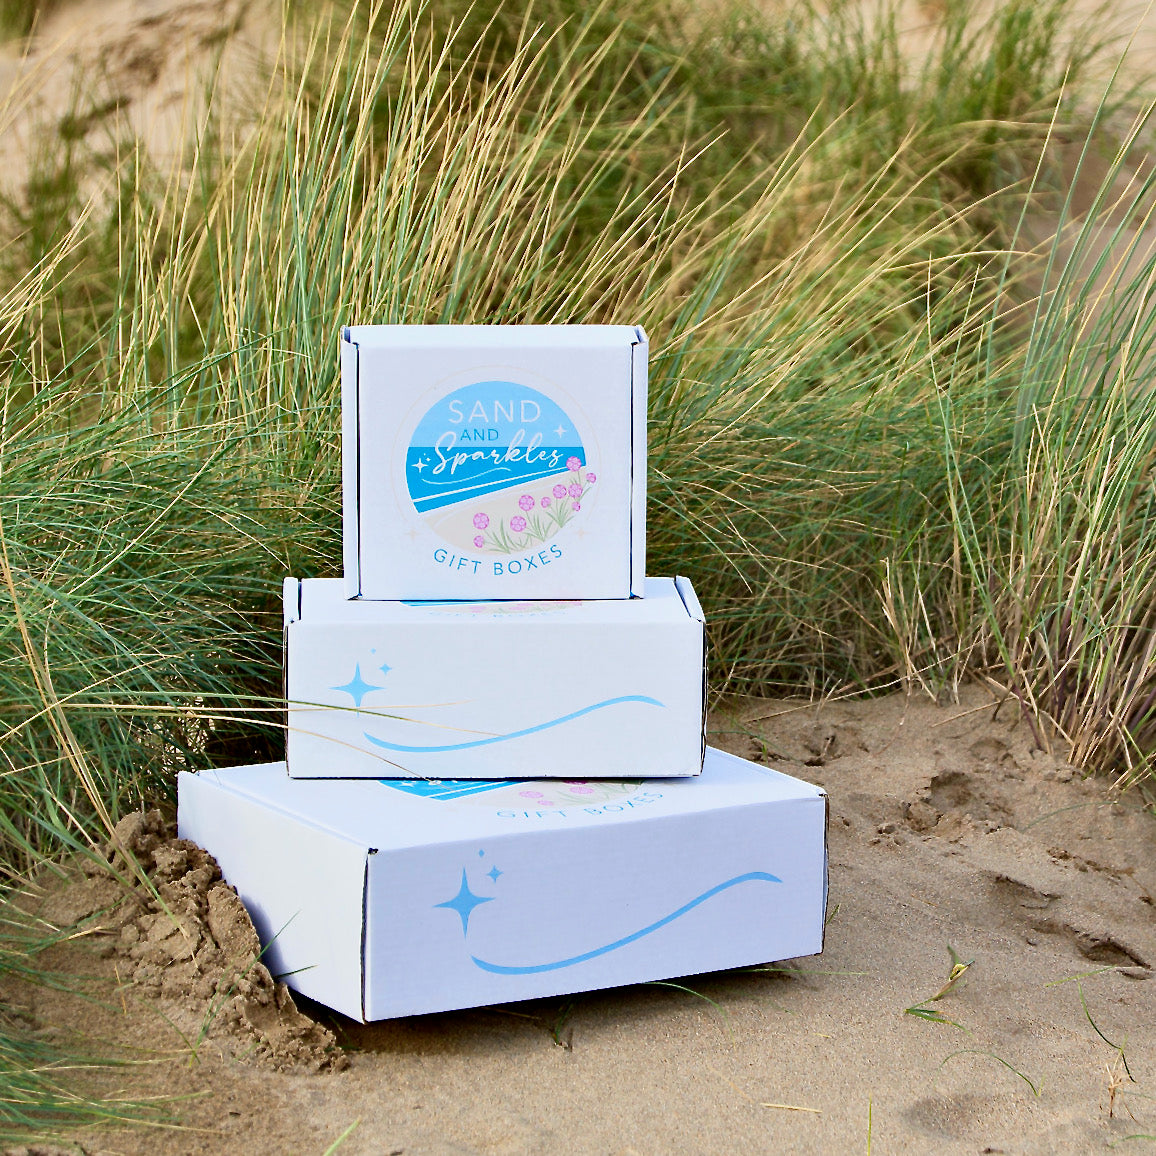 Sand and Sparkle Gift Boxes stacked in the sand in Devon